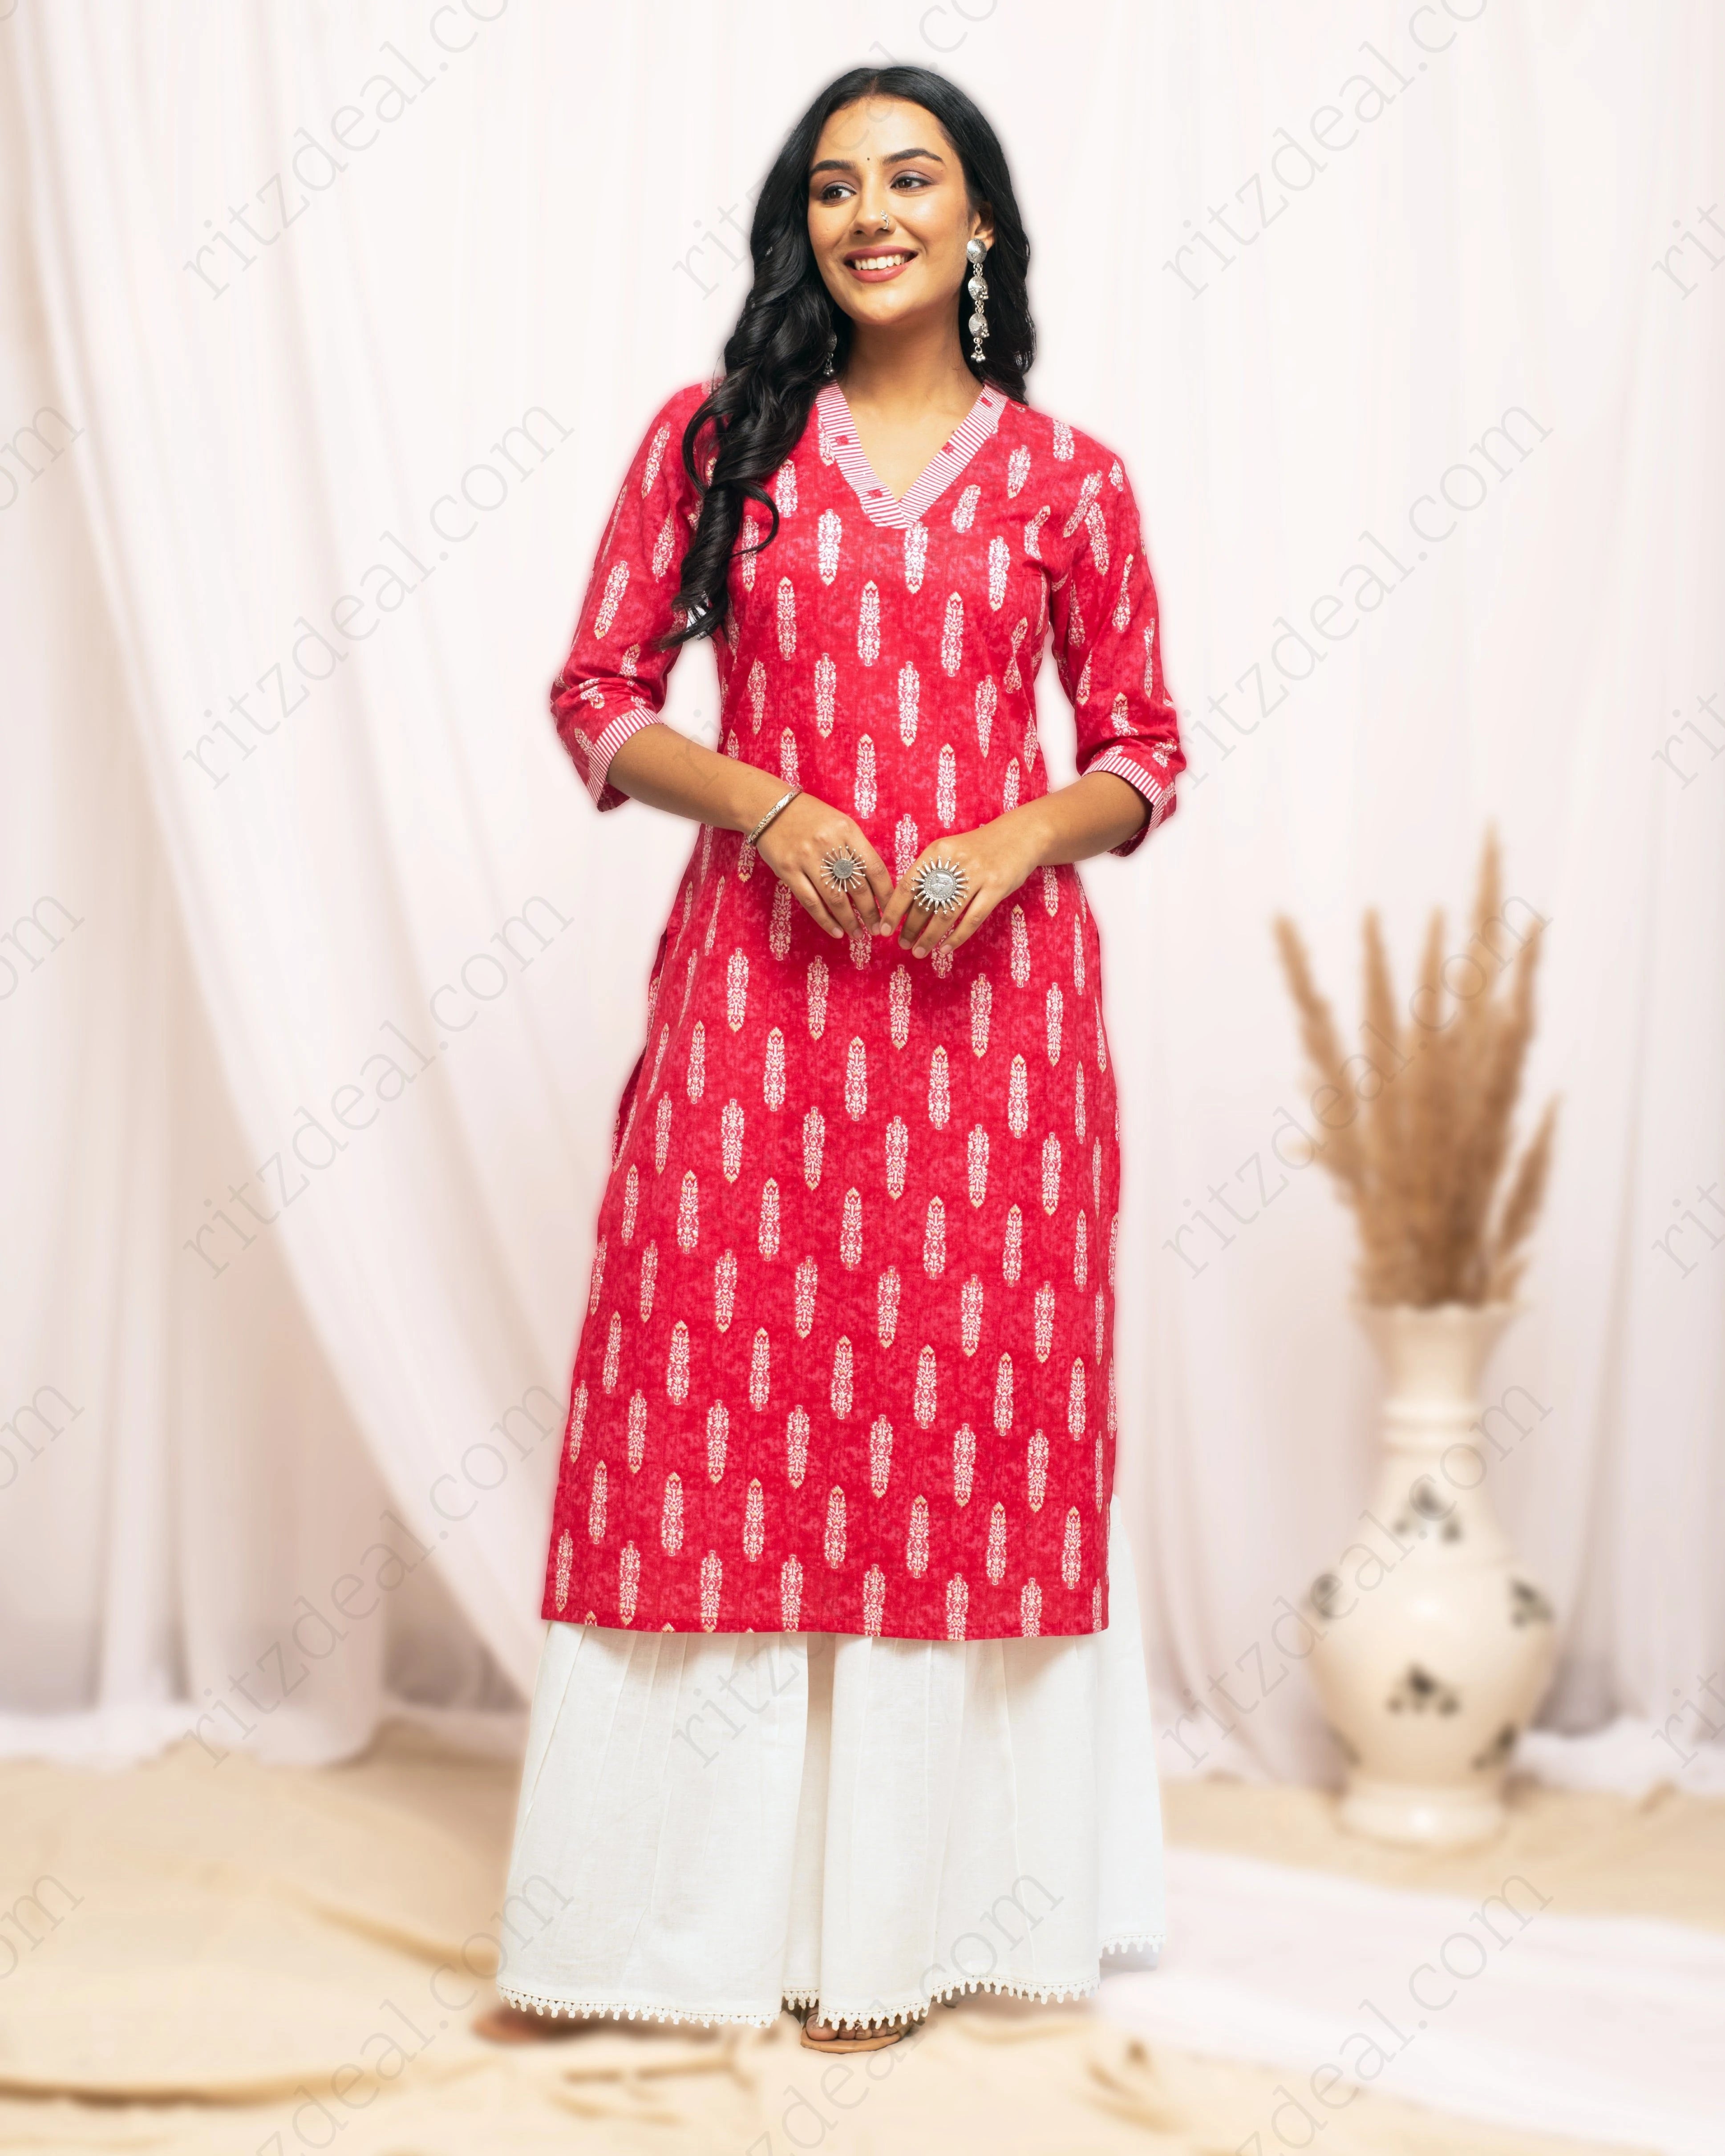   Add a touch of elegance to your wardrobe with our versatile Pink Cotton Printed Kurti Made from high-quality cotton fabric and featuring intricate prints, this kurti is perfect for everyday wear.